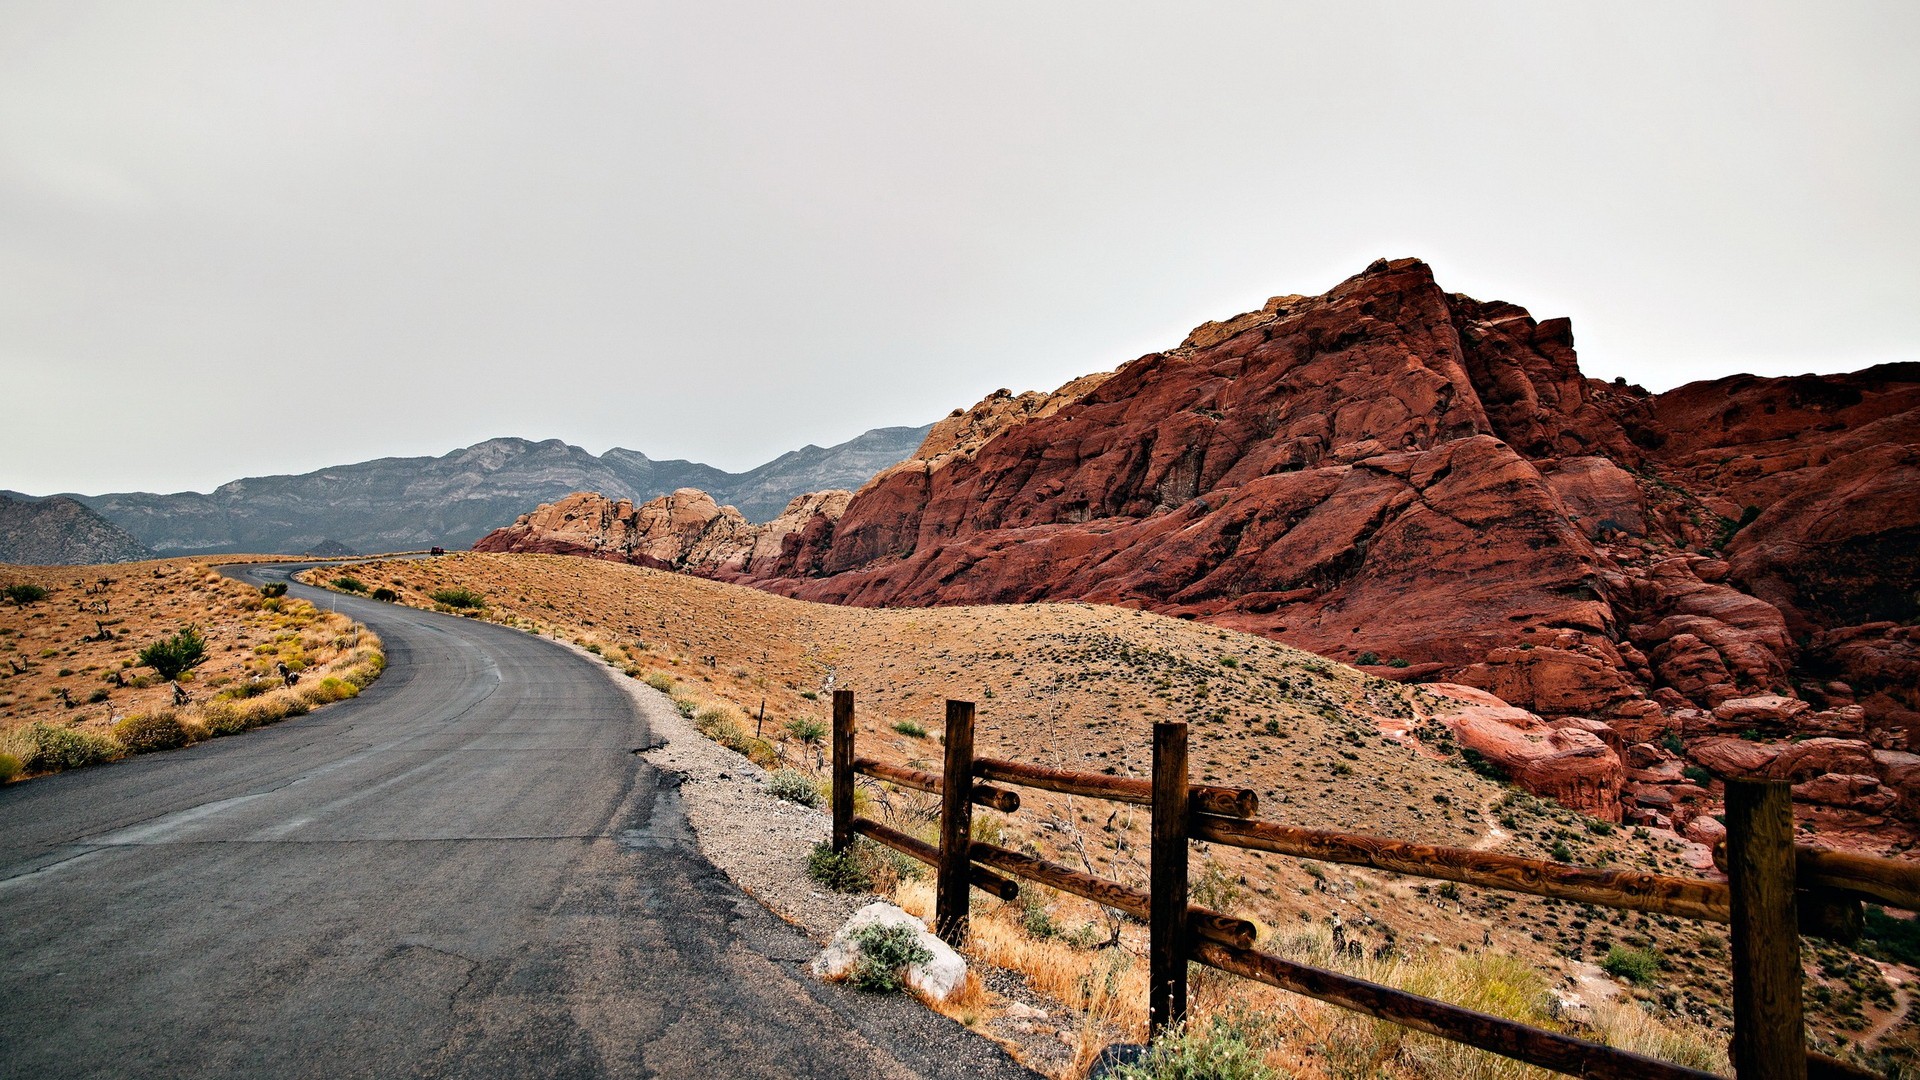 General 1920x1080 landscape road mountains Badlands (nature) Red Rock Canyon USA Nevada nature rocks fence